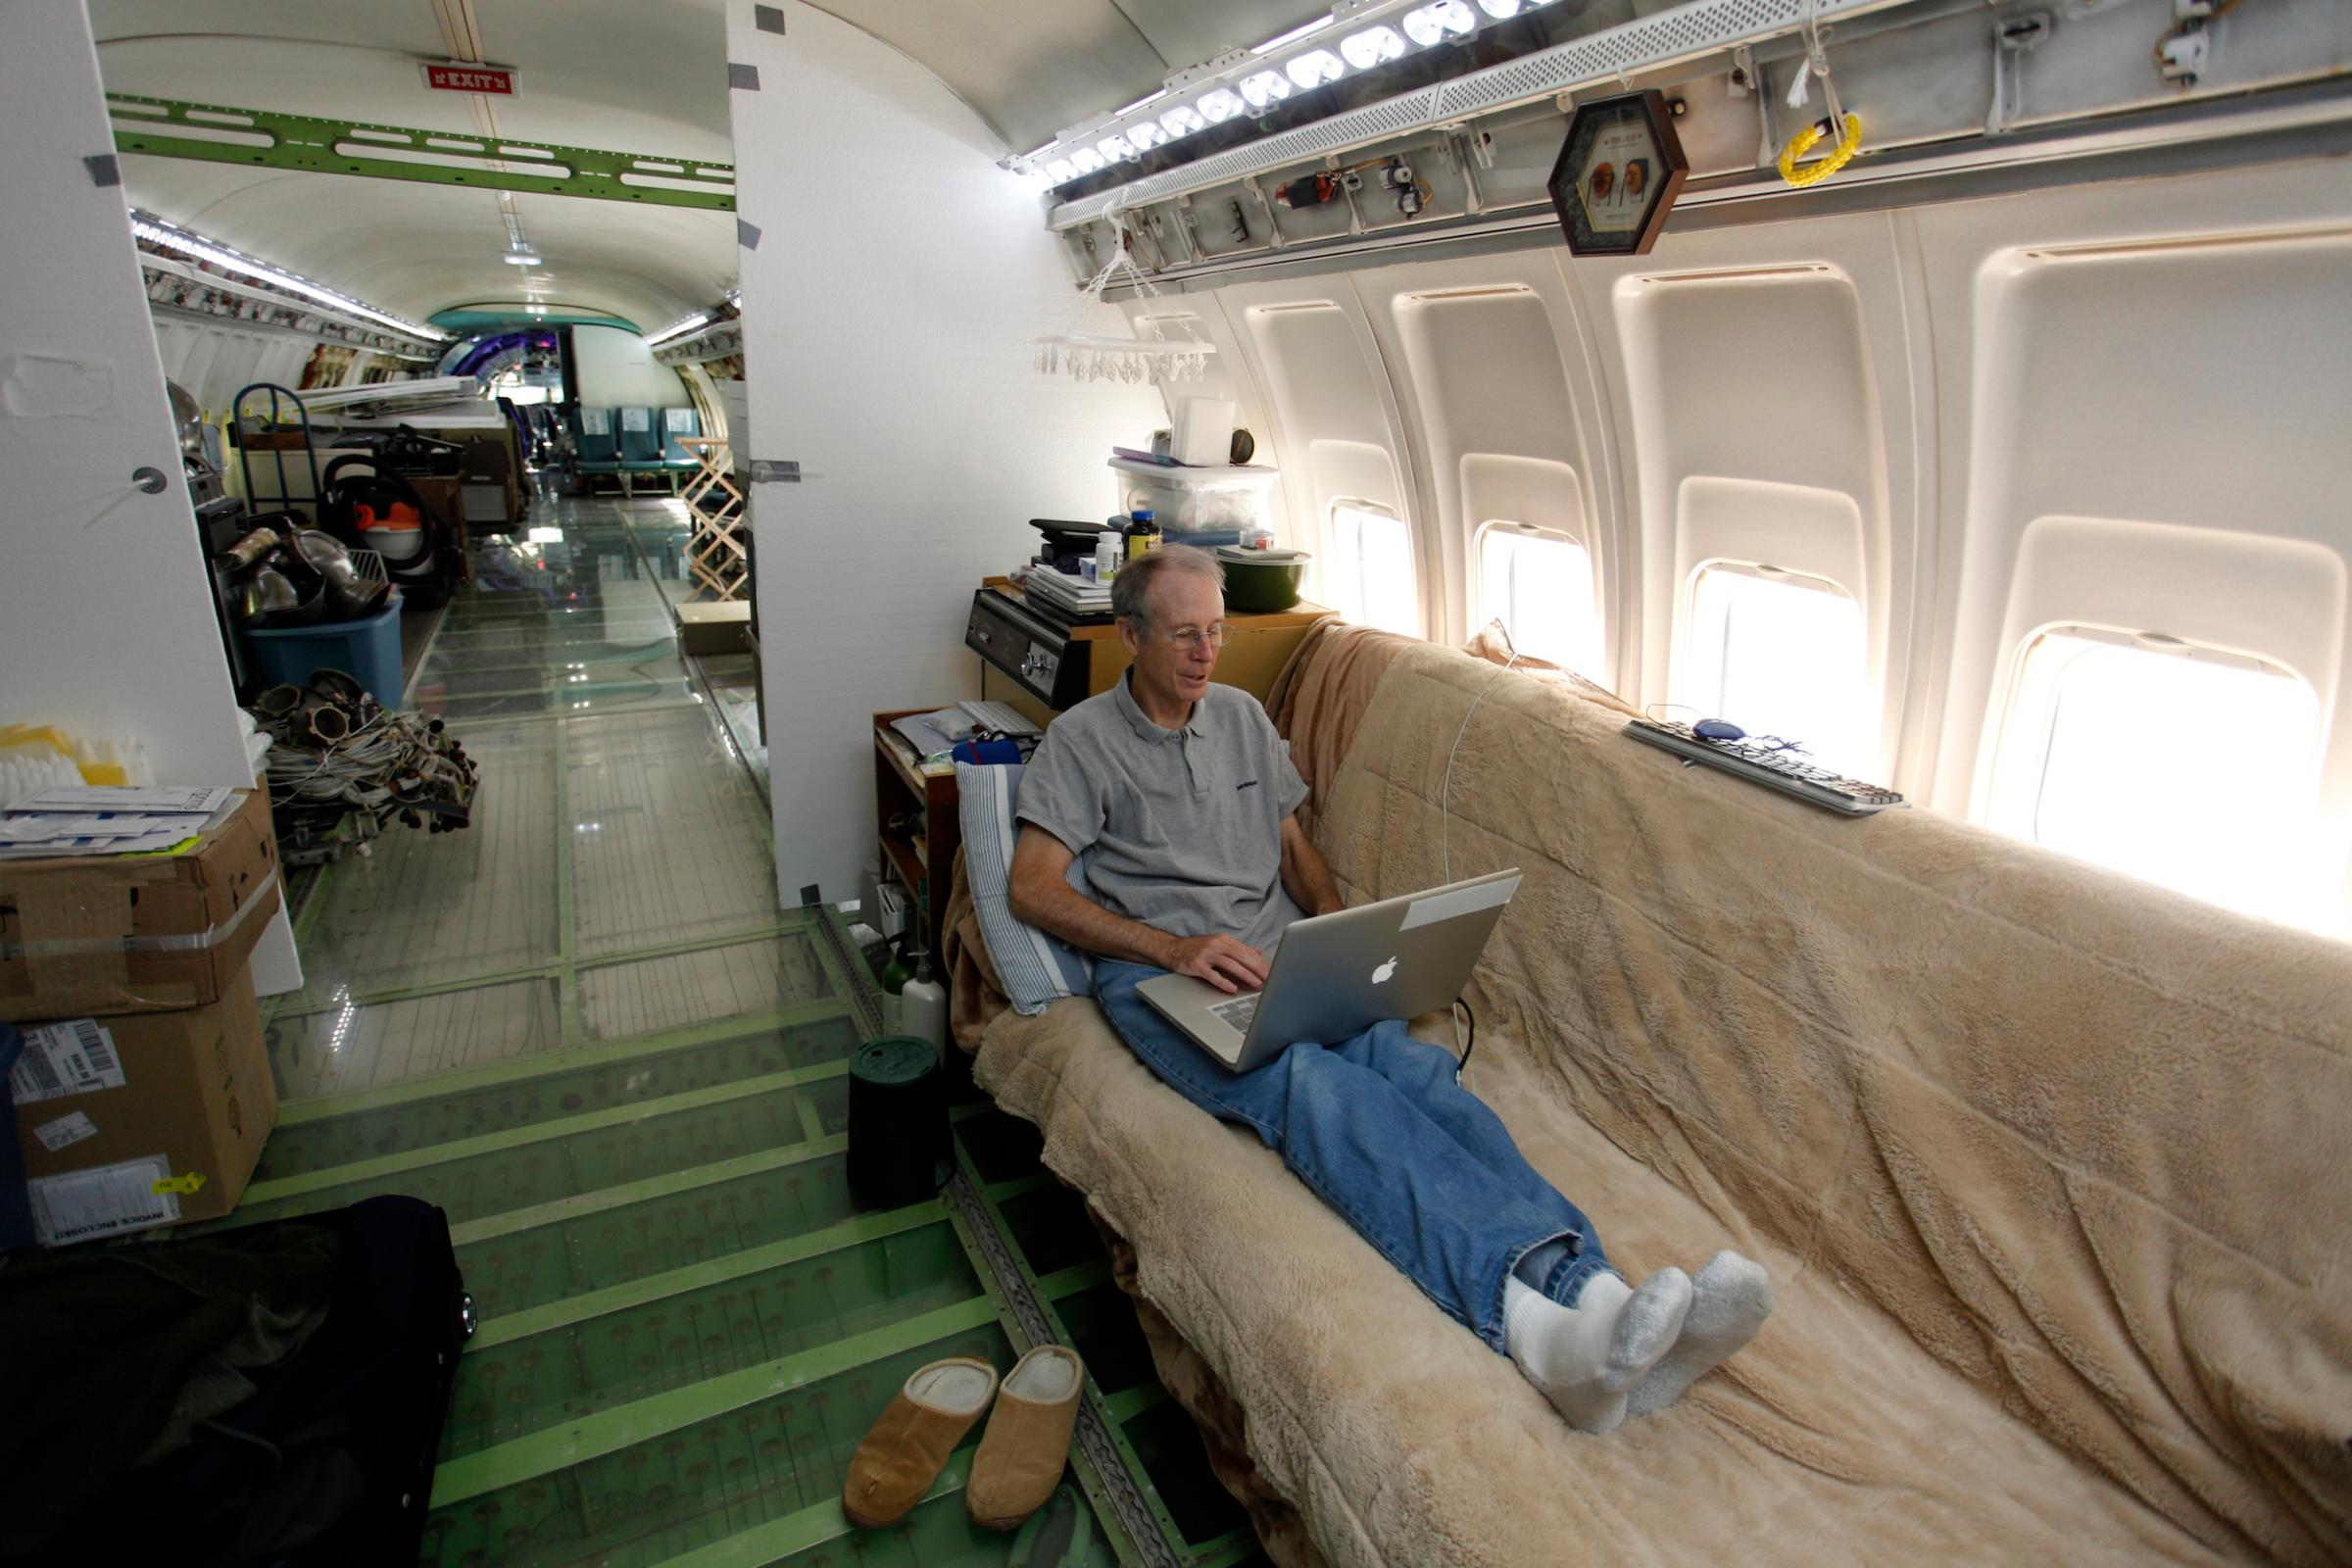 Bruce Campbell sits on his futon bed while using a laptop in his Boeing 727 home in the woods outside the suburbs of Portland, Oregon